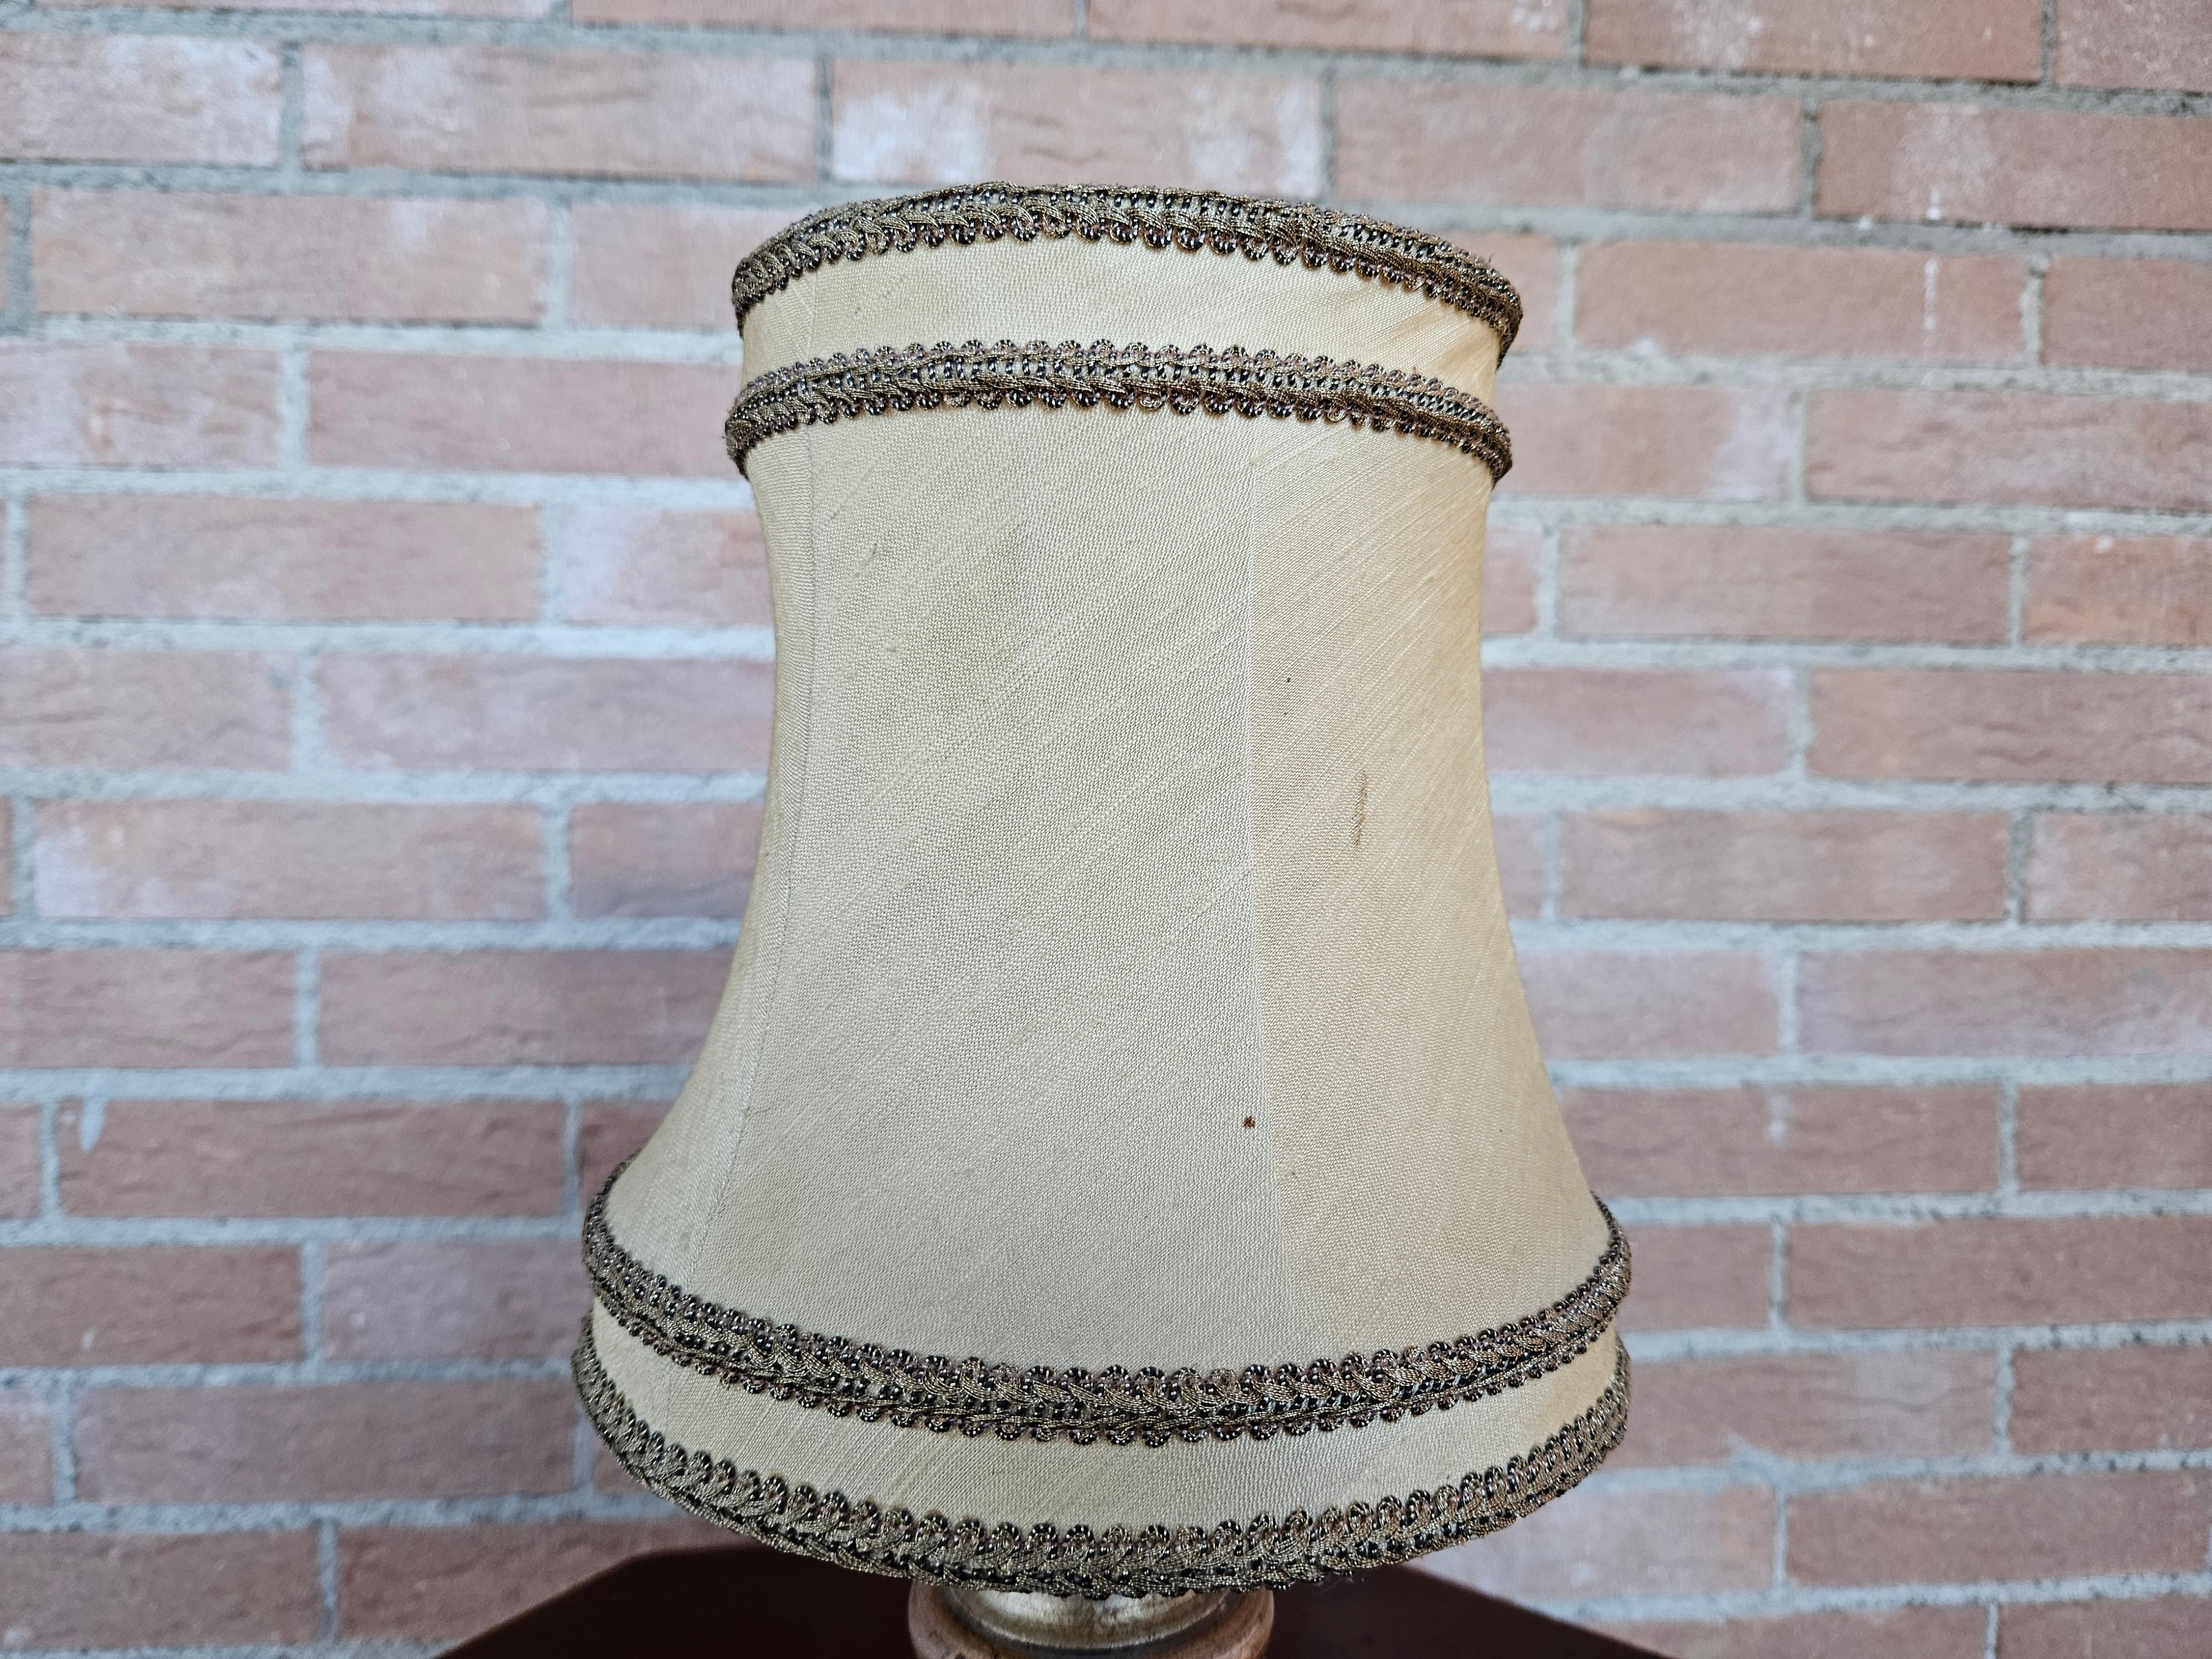 Bedside lamp (abat jour) or small wooden table lamp with cloth shade.

Bulb not included.